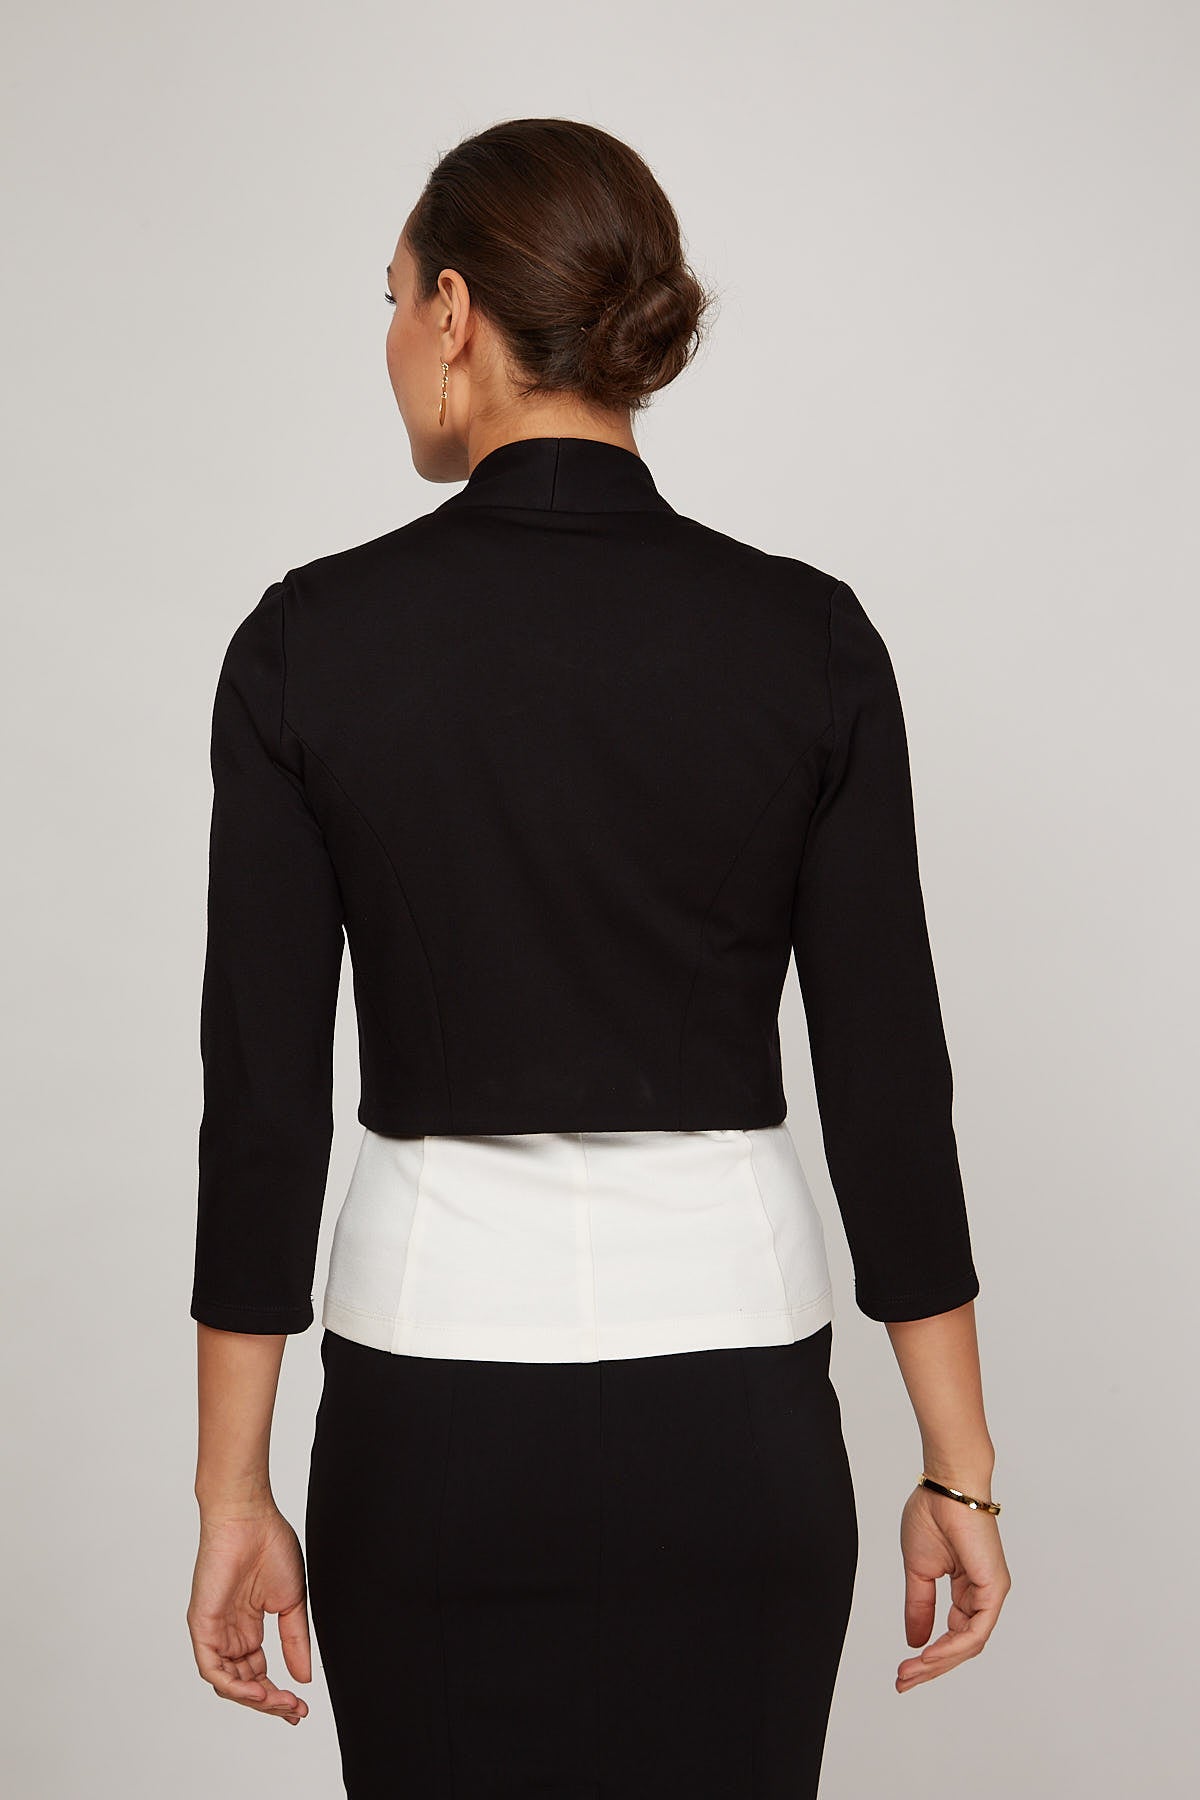 Women' Business Mila Jacket - Black NORA GARDNER | OFFICIAL STORE for work and office